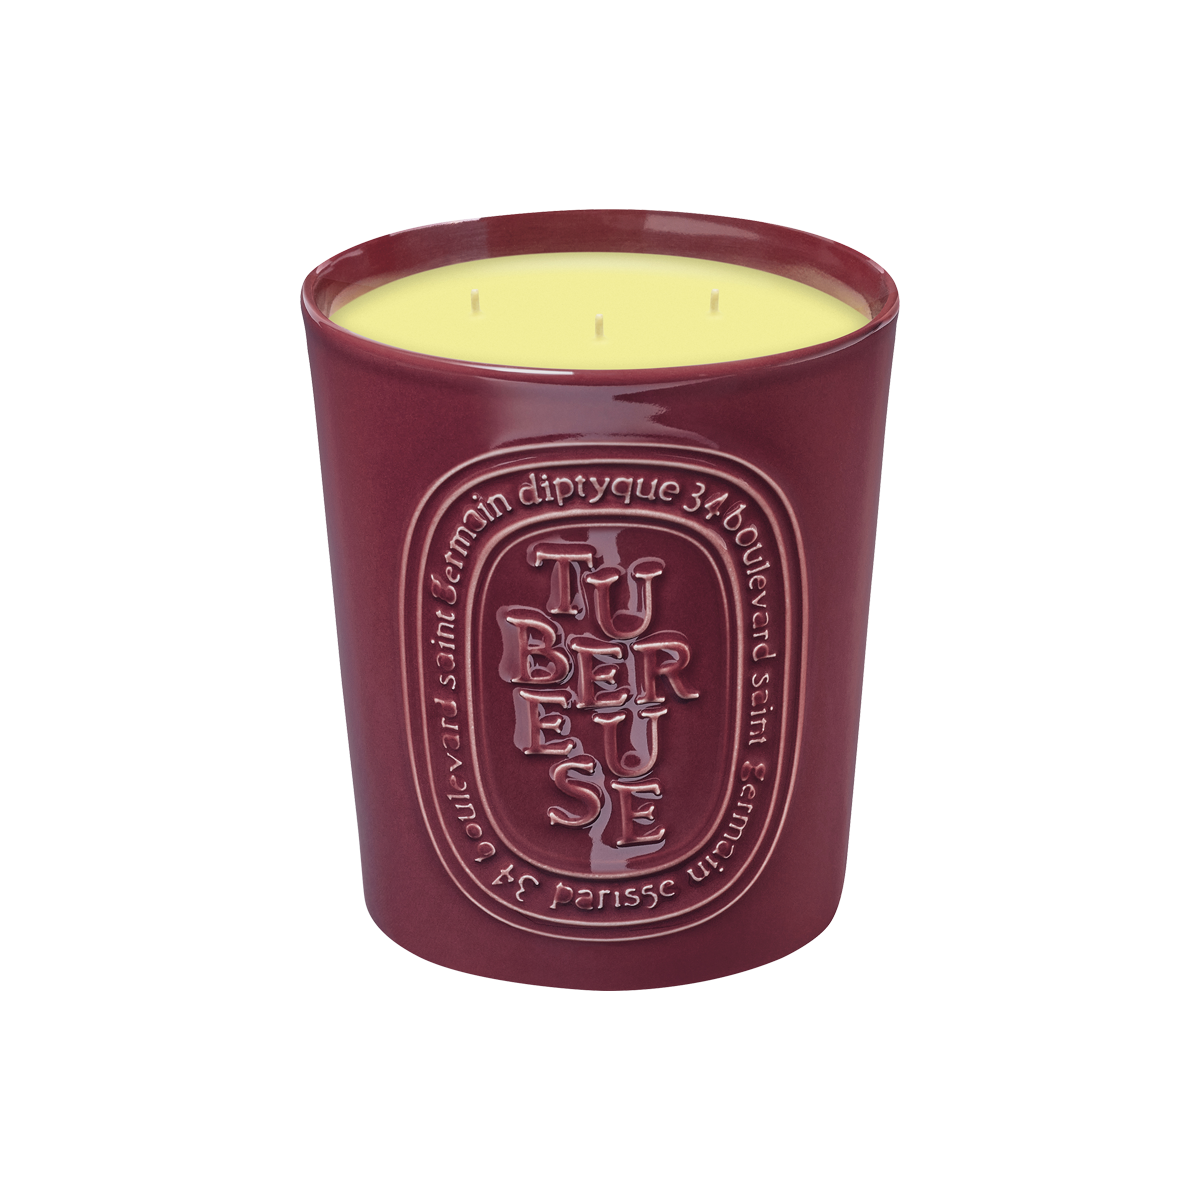 Diptyque - Tubereuse Scented Candle